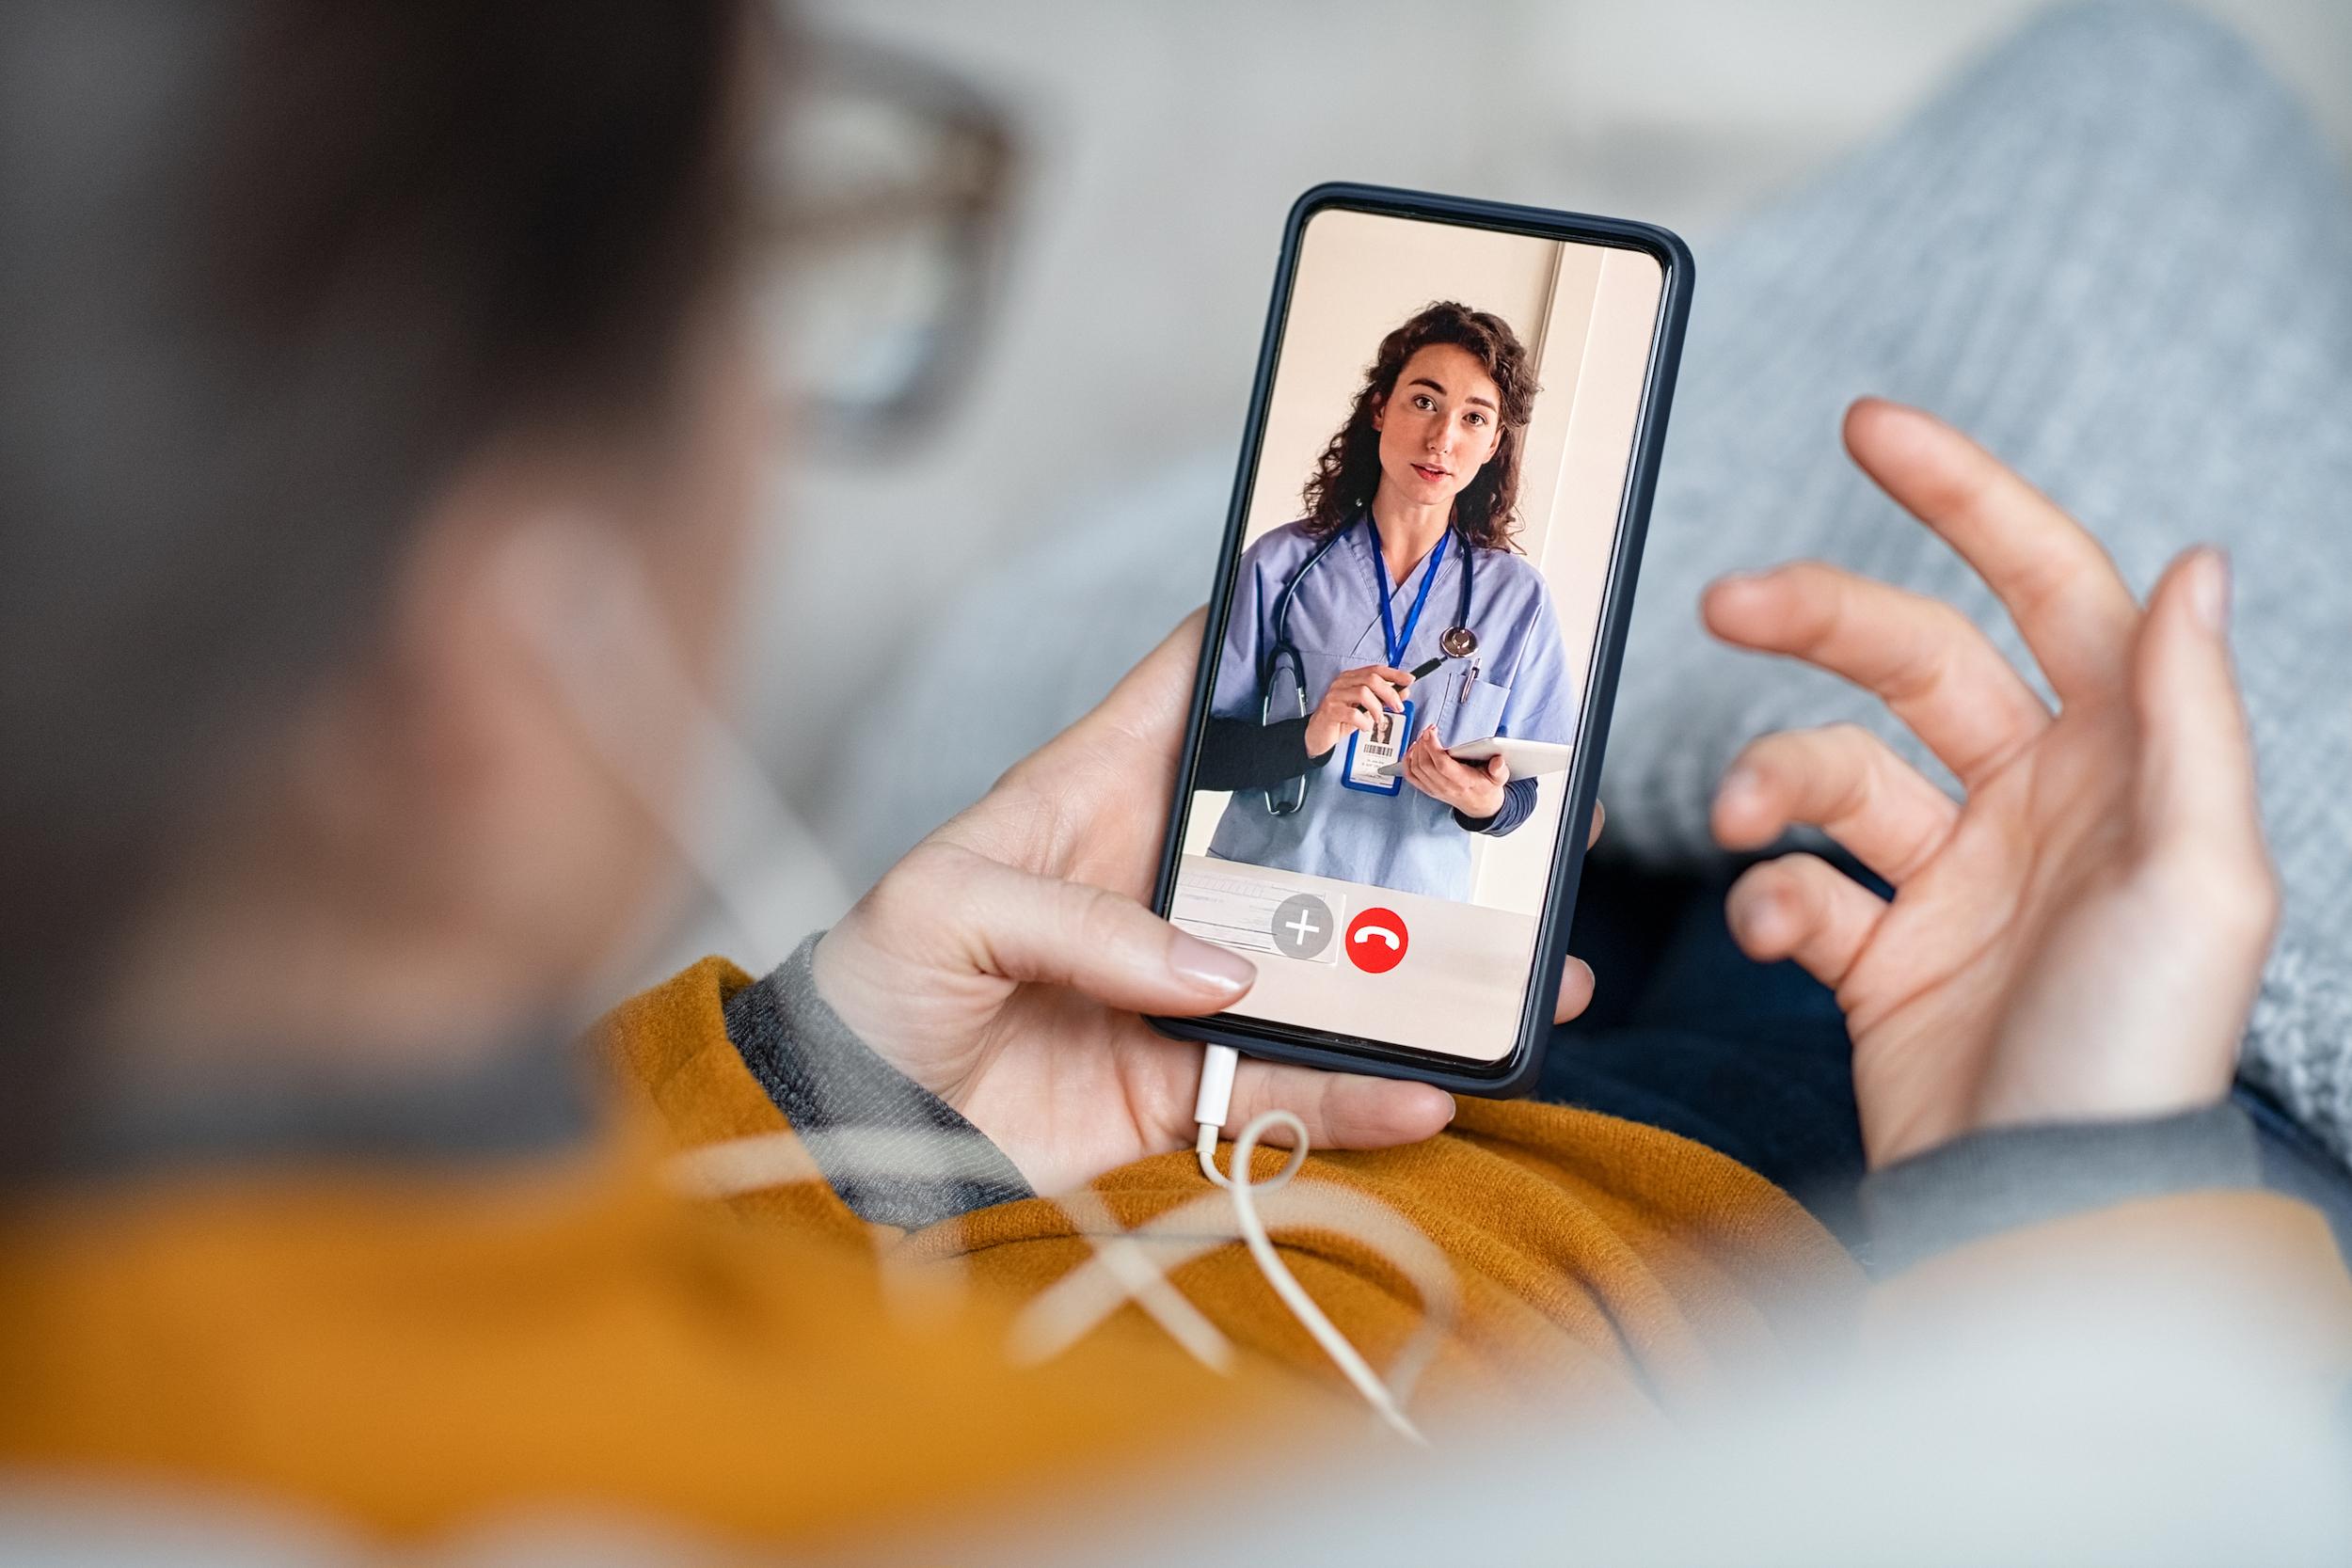 A person is attending a virtual doctor's appointment on their cell phone